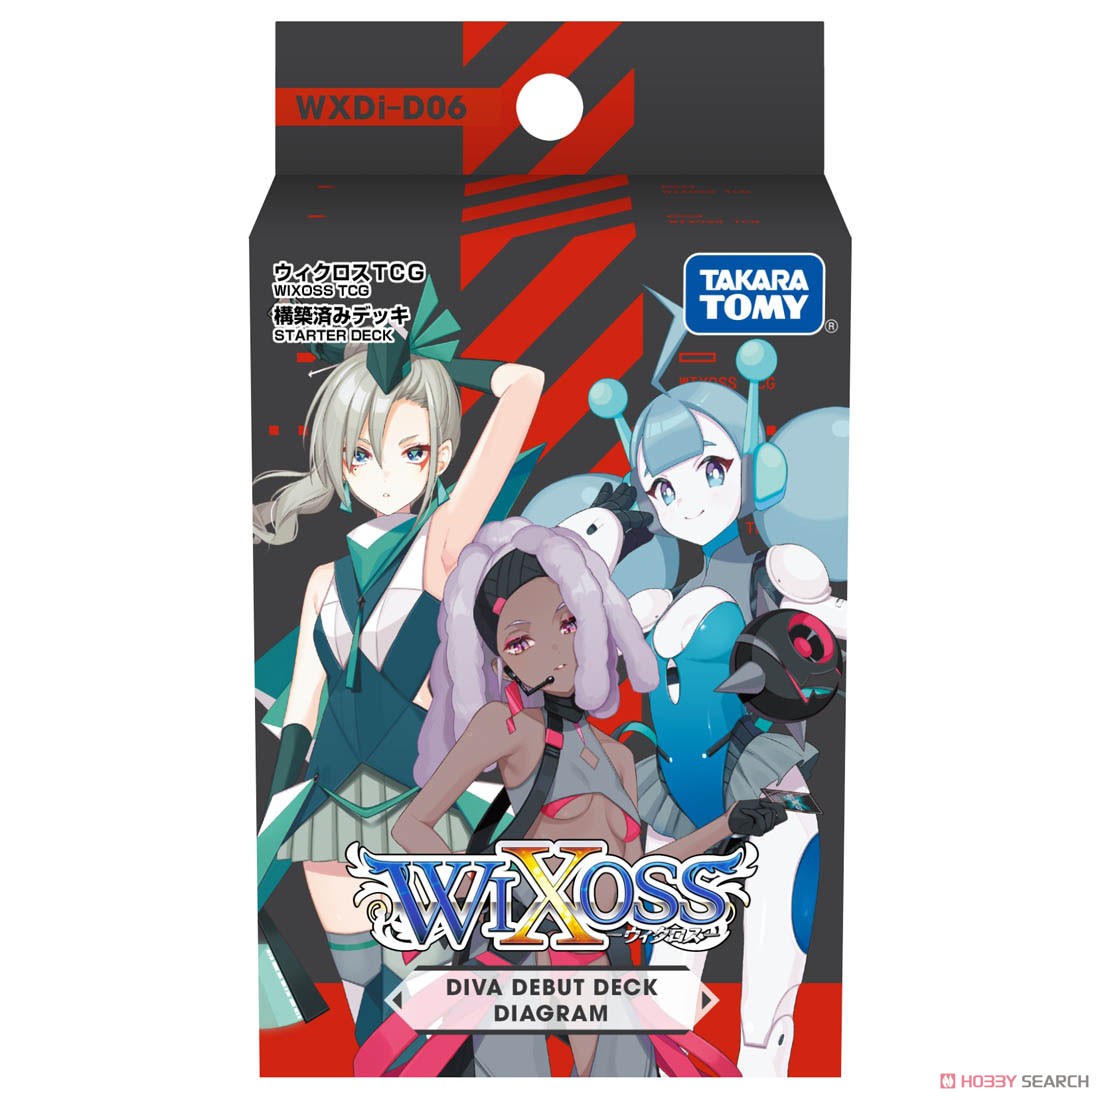 Wixoss TCG Diva Debut Deck Diagram [WXDi-D06] (Trading Cards) Package1